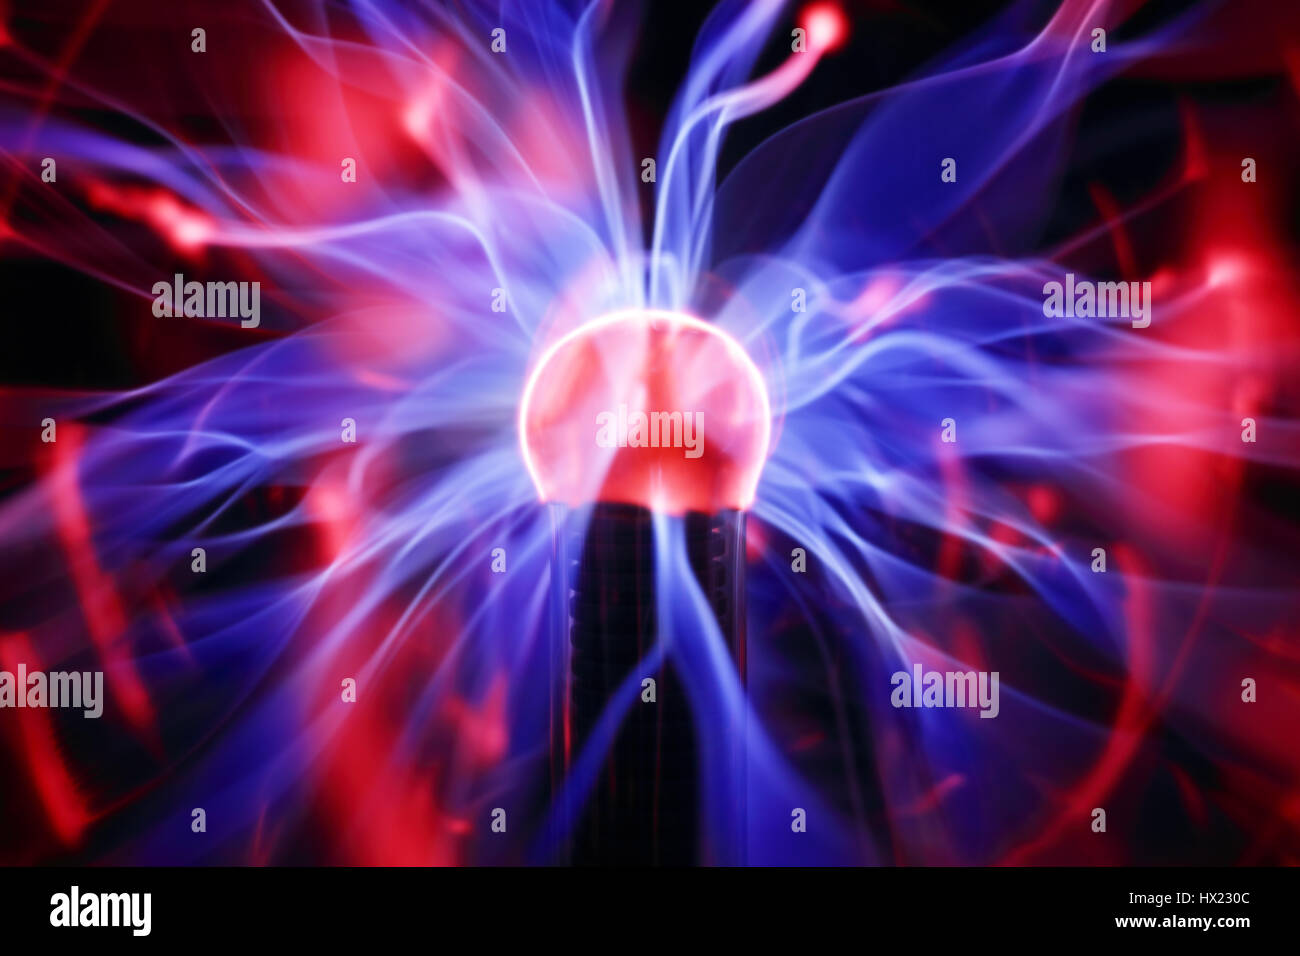 Plasma ball lamp energy, touching glowing glass sphere concept for power, electricity, science and physics Stock Photo